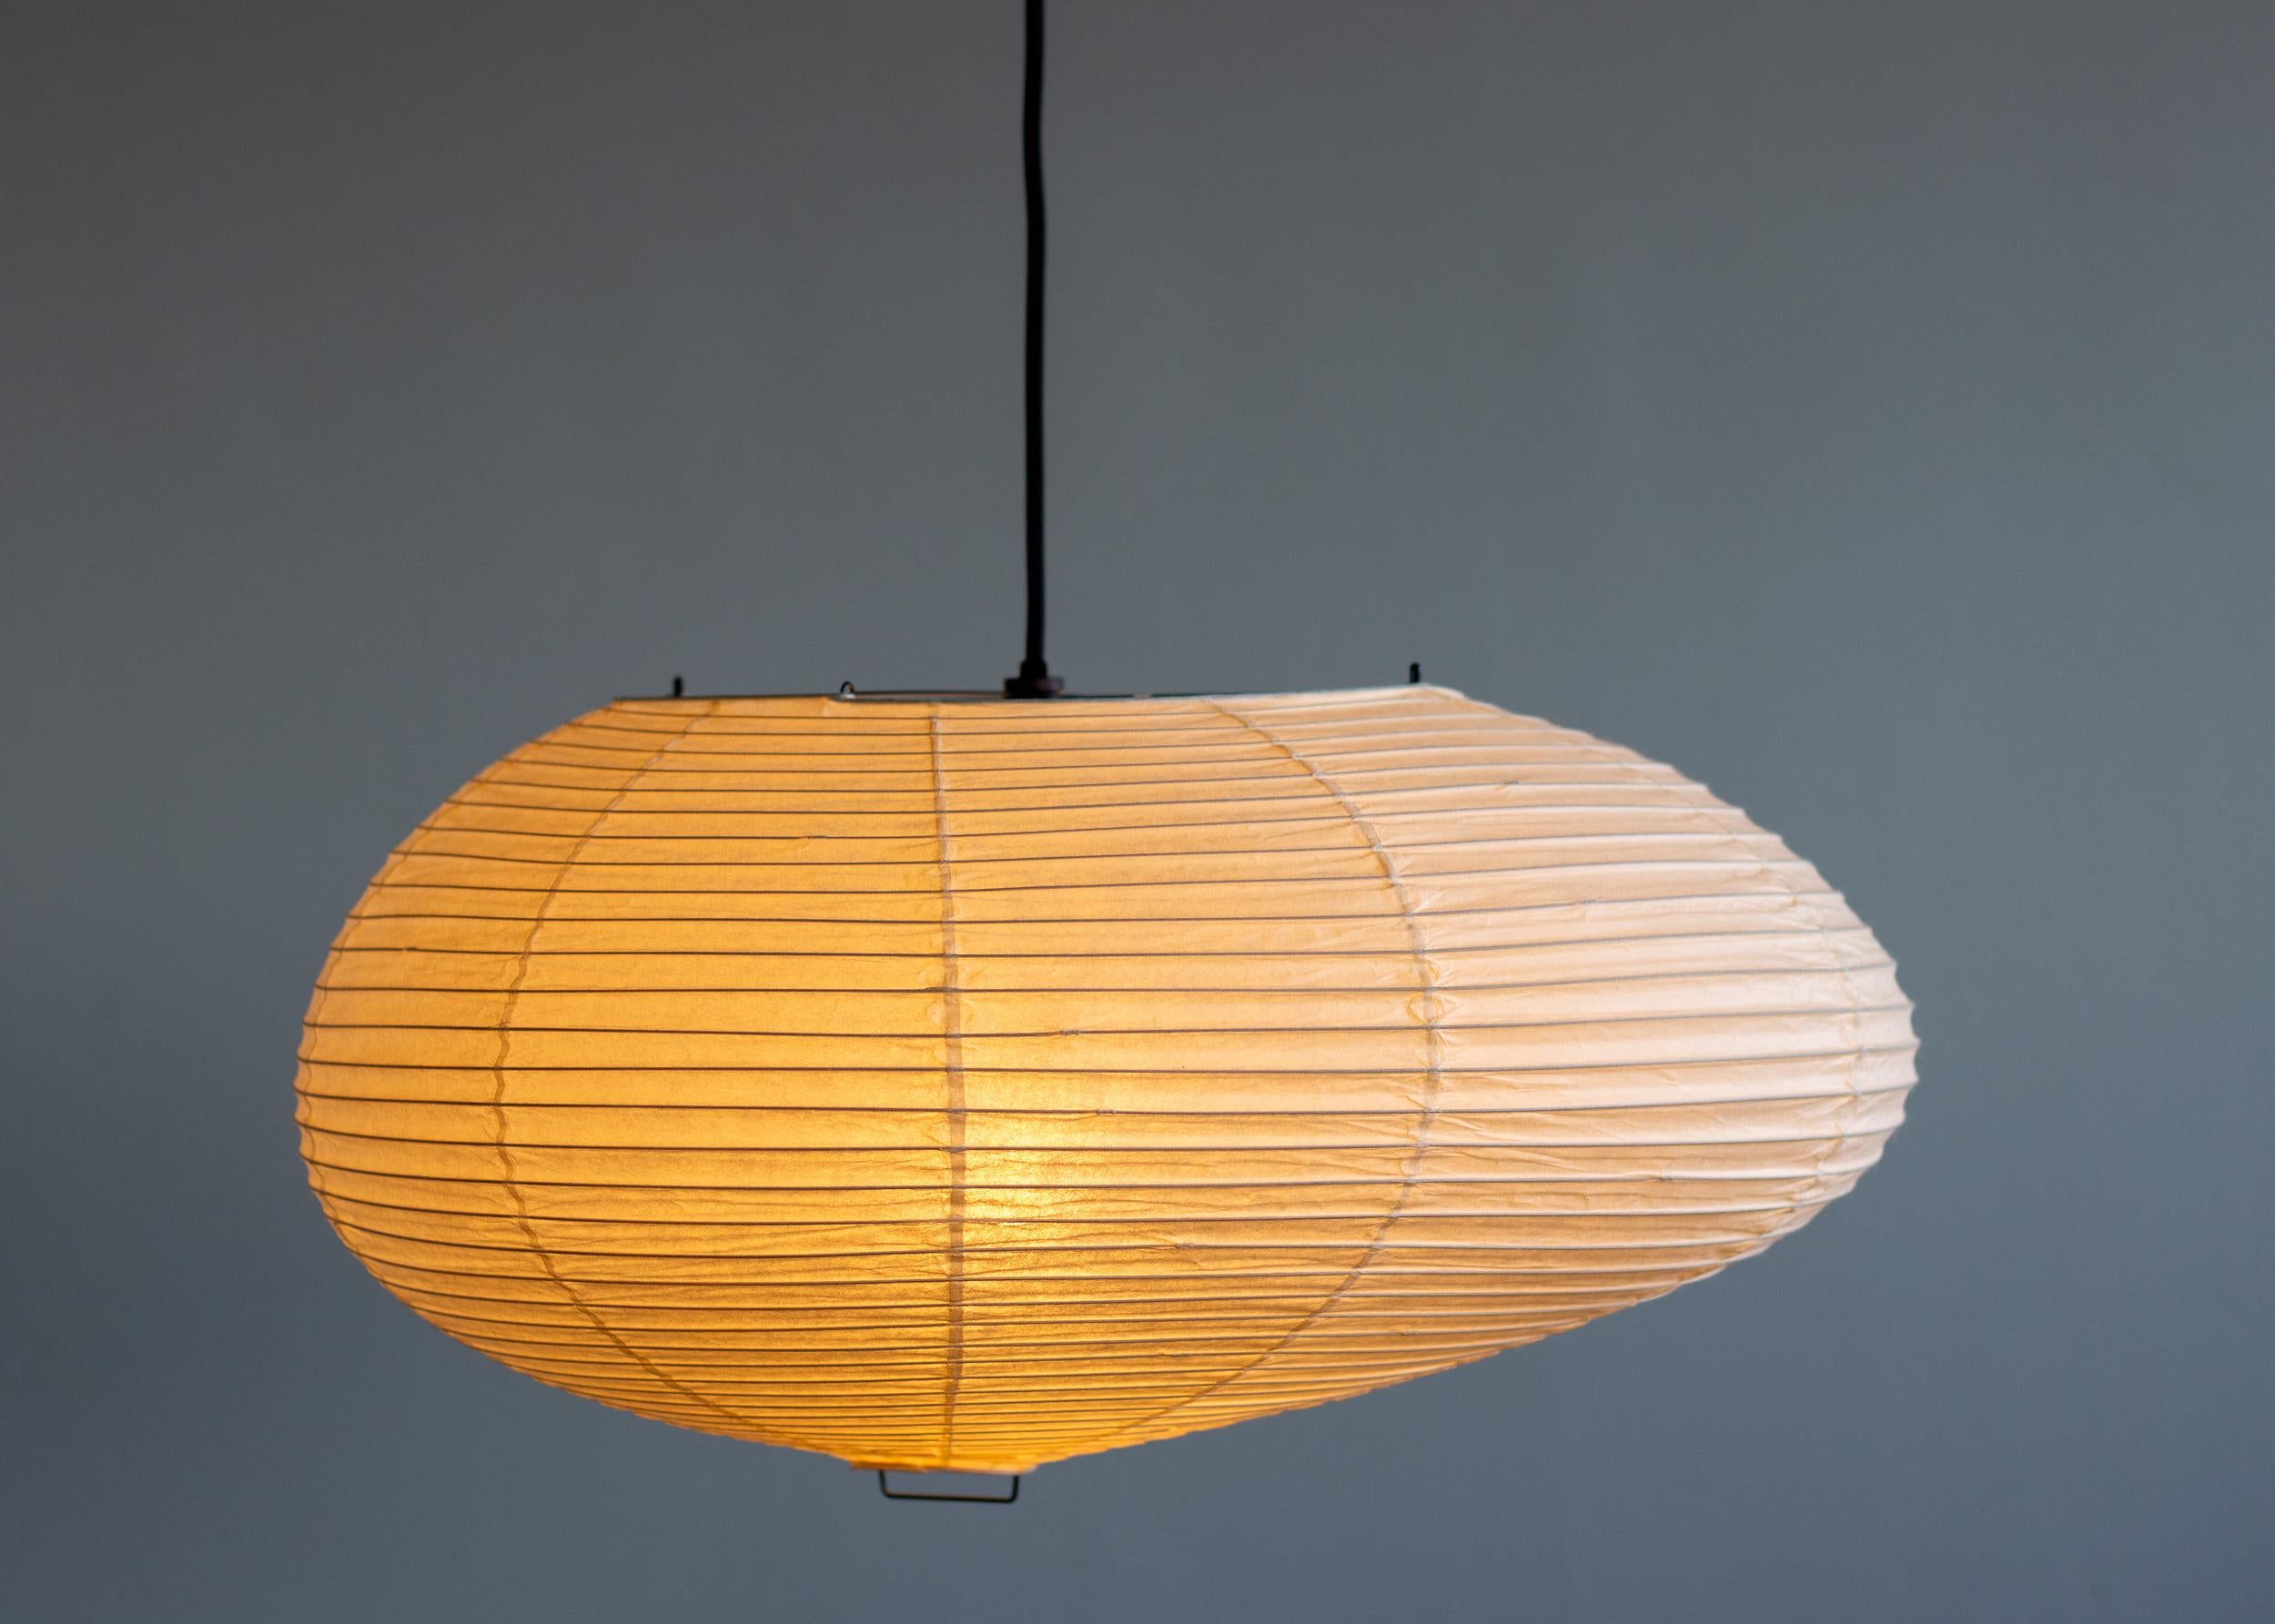 Akari 16A pendant designed by Isamu Noguchi, 1951. Manufactured by Ozeki & Co. in Japan. 
Bambu structure covered by washi paper. Wired for U.S. standards. 
Recent version, new cord and canopy from Noguchi Museum. 
This fixture has one socket. We